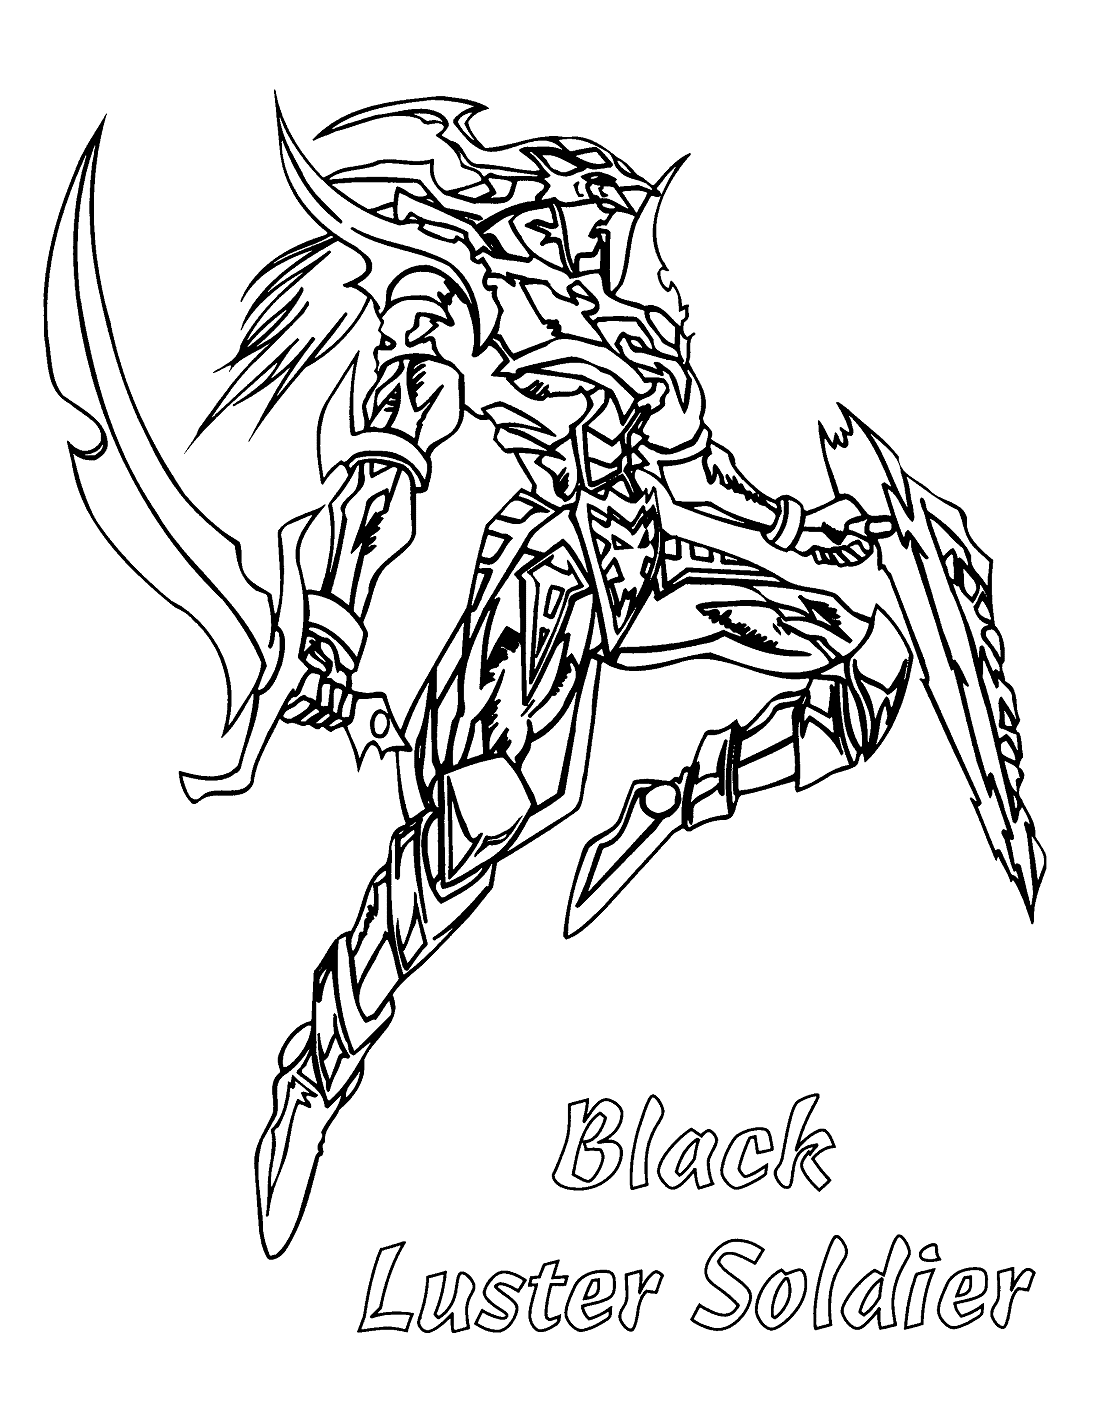 Black Luster Soldier Coloring Pages